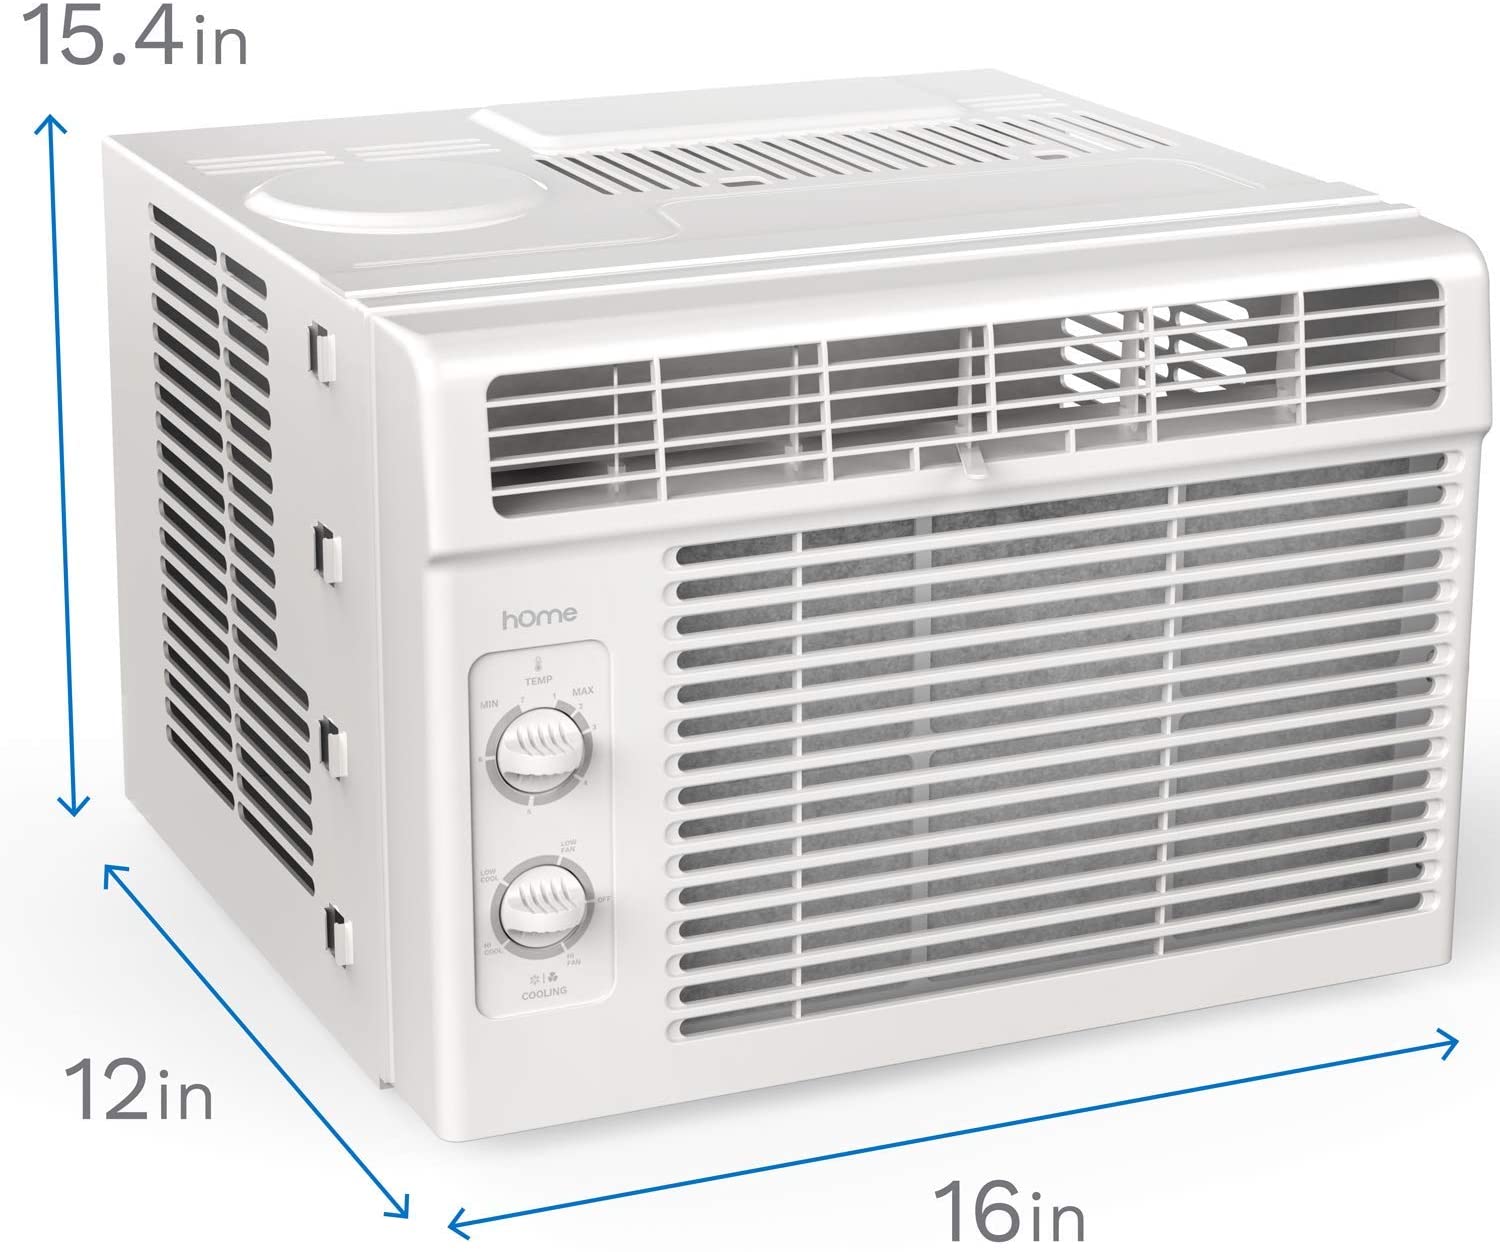 hOmeLabs Window Air Conditioner 5000 BTU - Easy Mechanical Control Compact AC Unit with Washable Reusable Filter, 2 Cooling Speeds, 2 Fan Speeds - Ideal for Bedroom and Rooms up to 150 Sq. Ft. - image 2 of 9